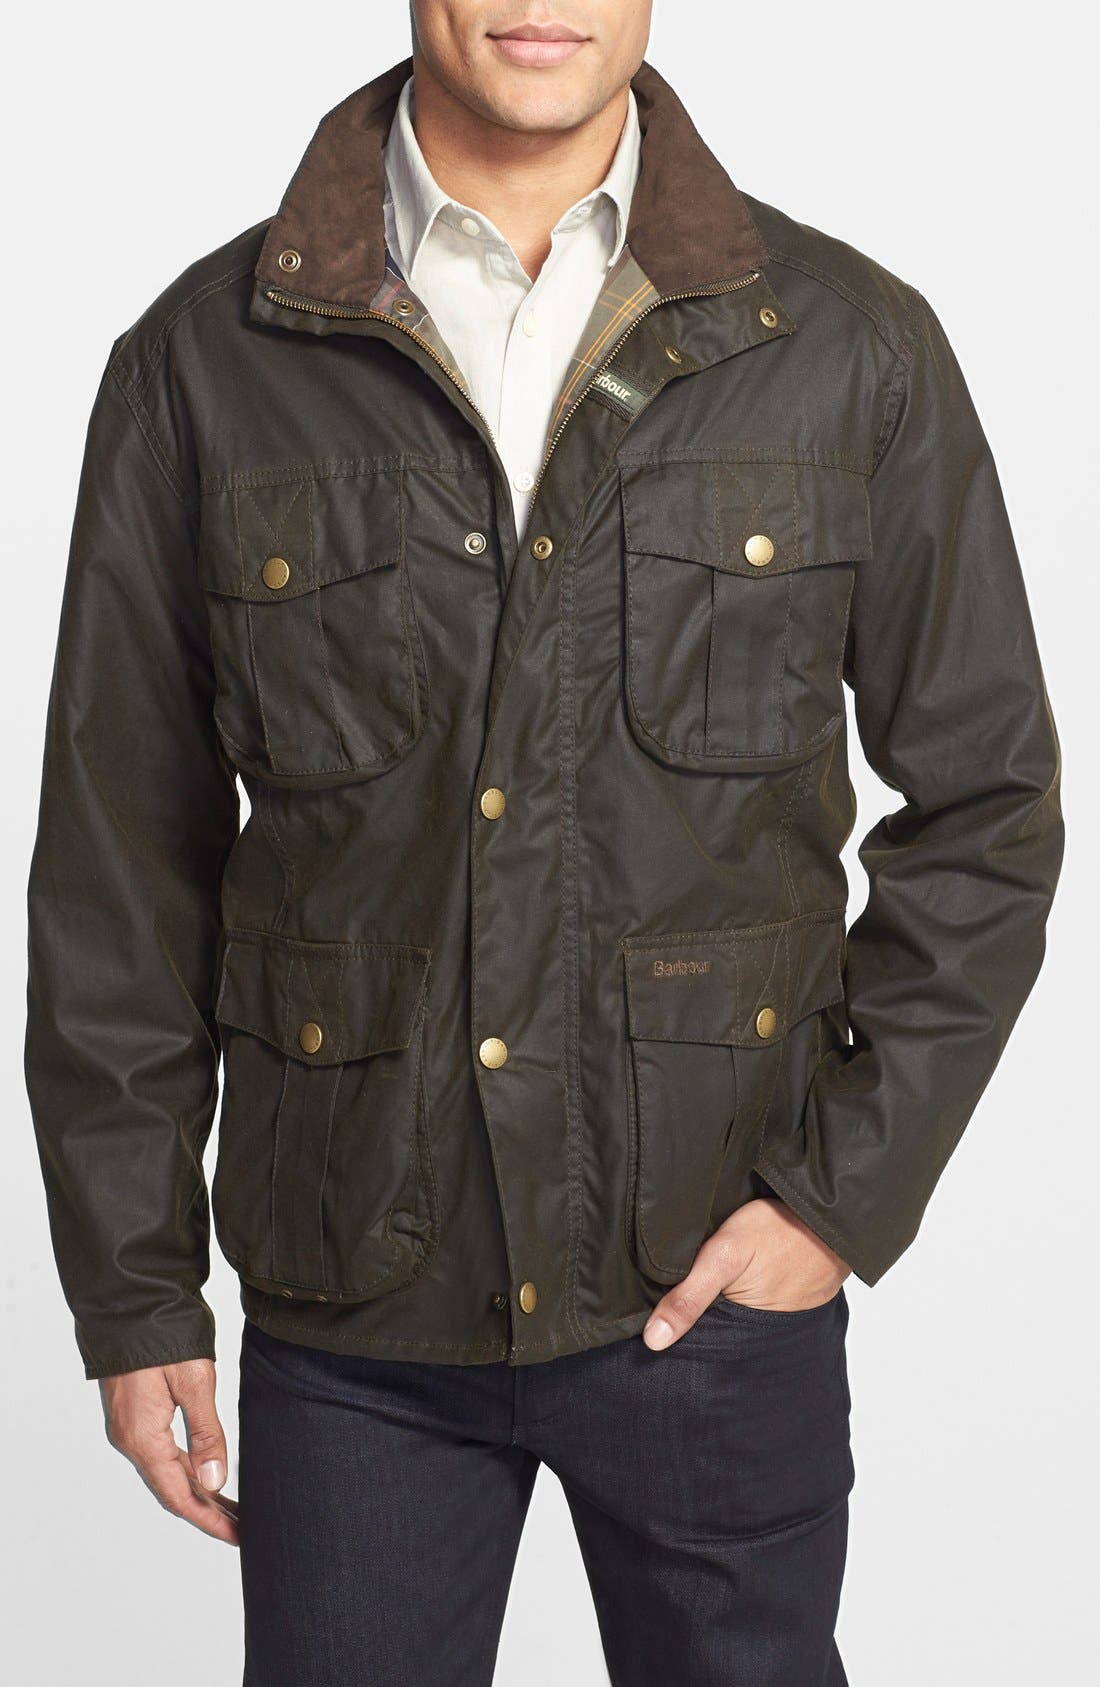 barbour dhgate